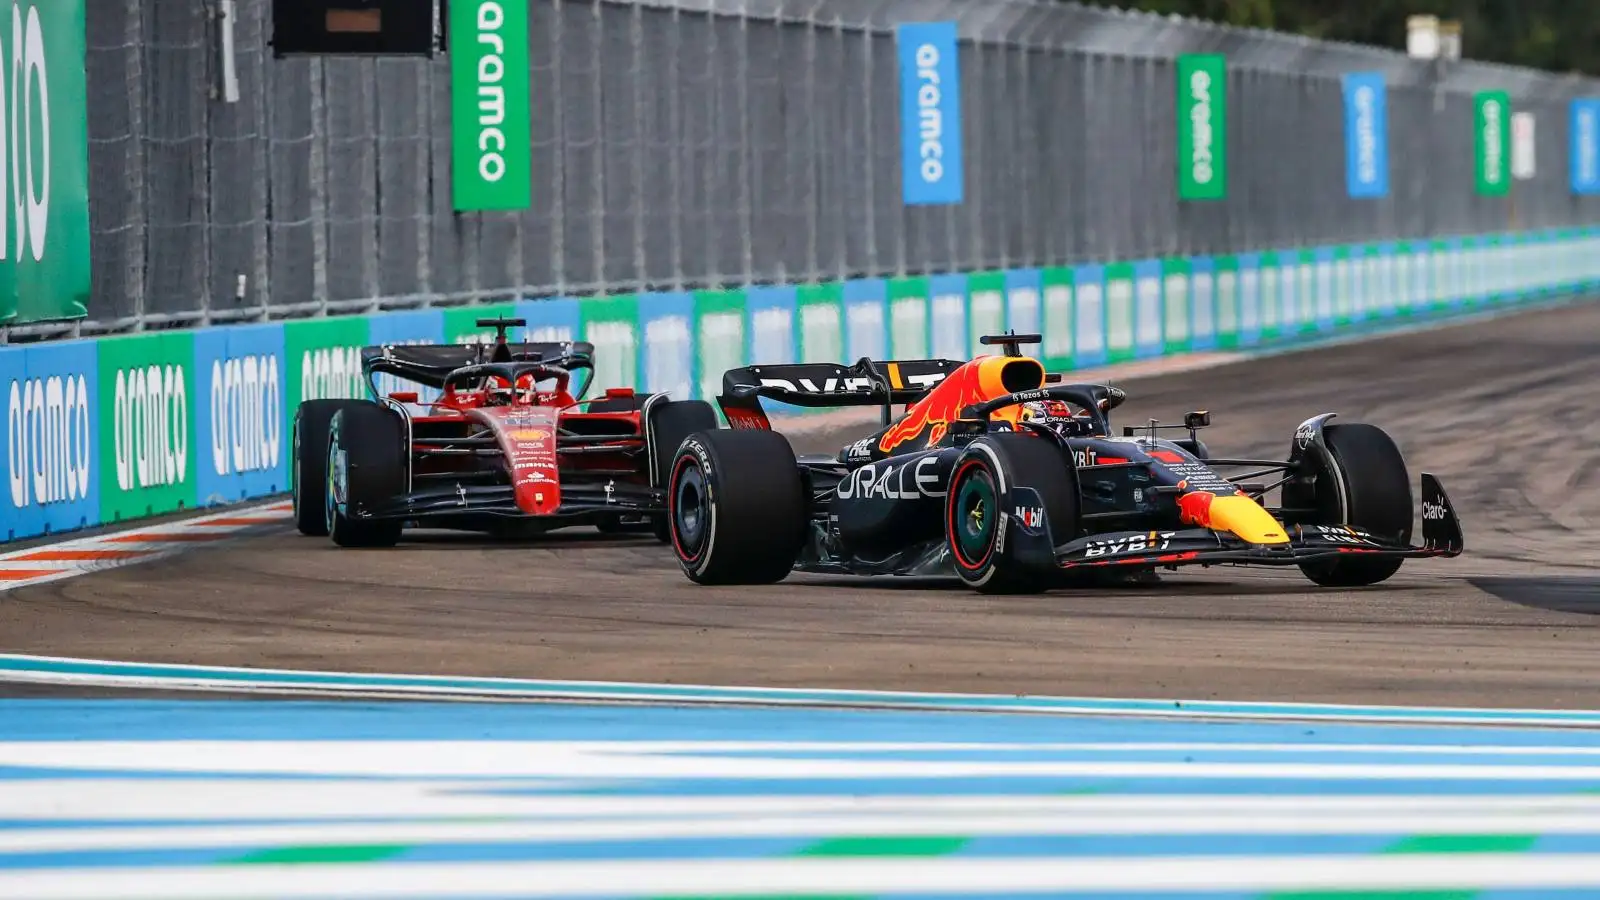 Charles Leclerc chases Max Verstappen in Miami. United States, May 2022.